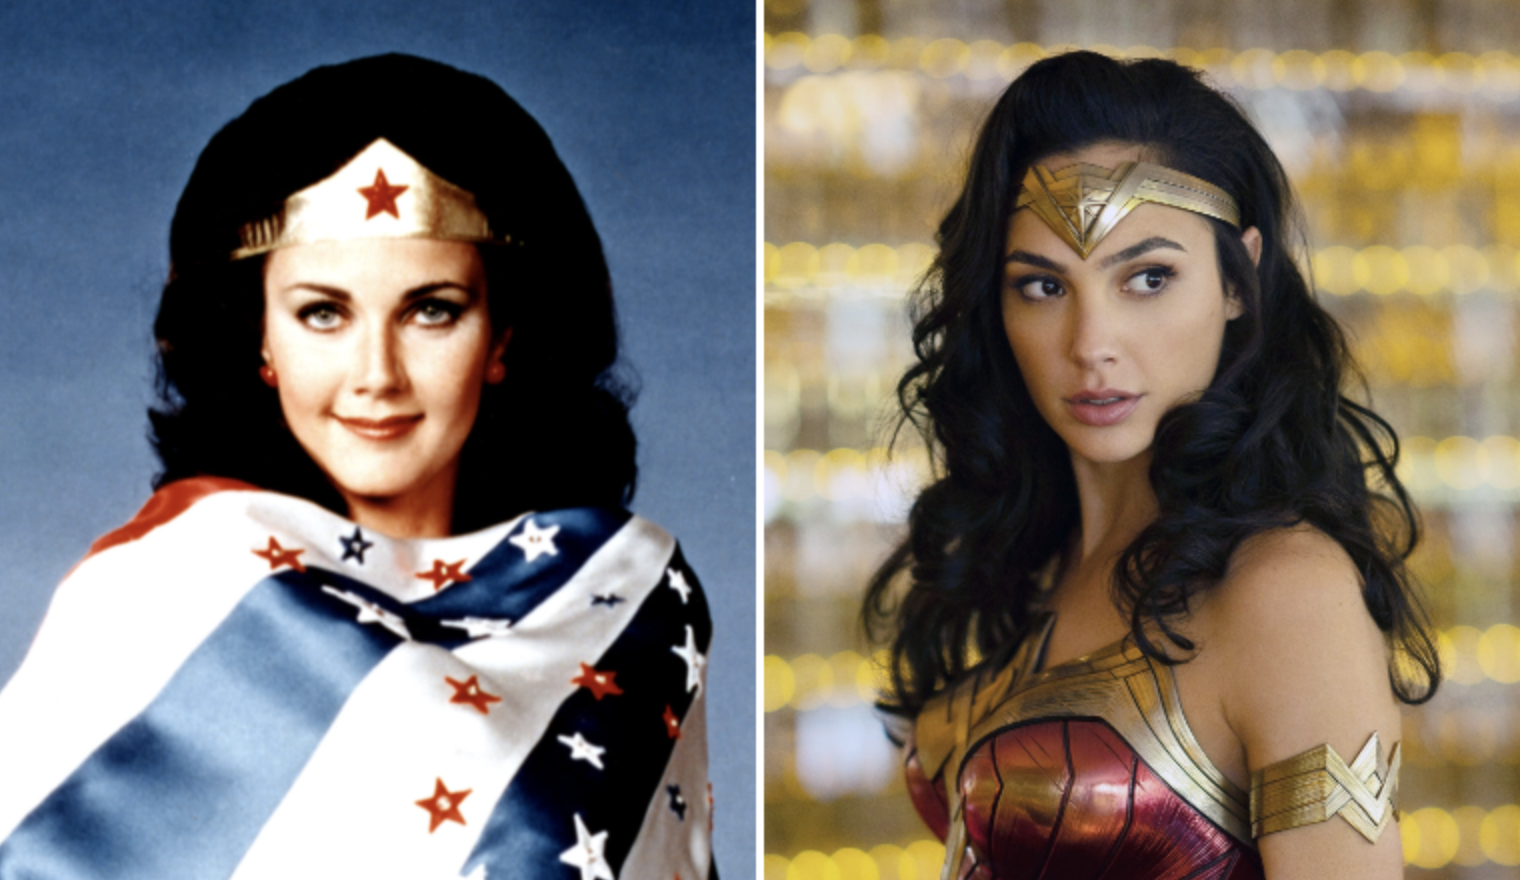 dave kahley recommends lynda carter having sex pic